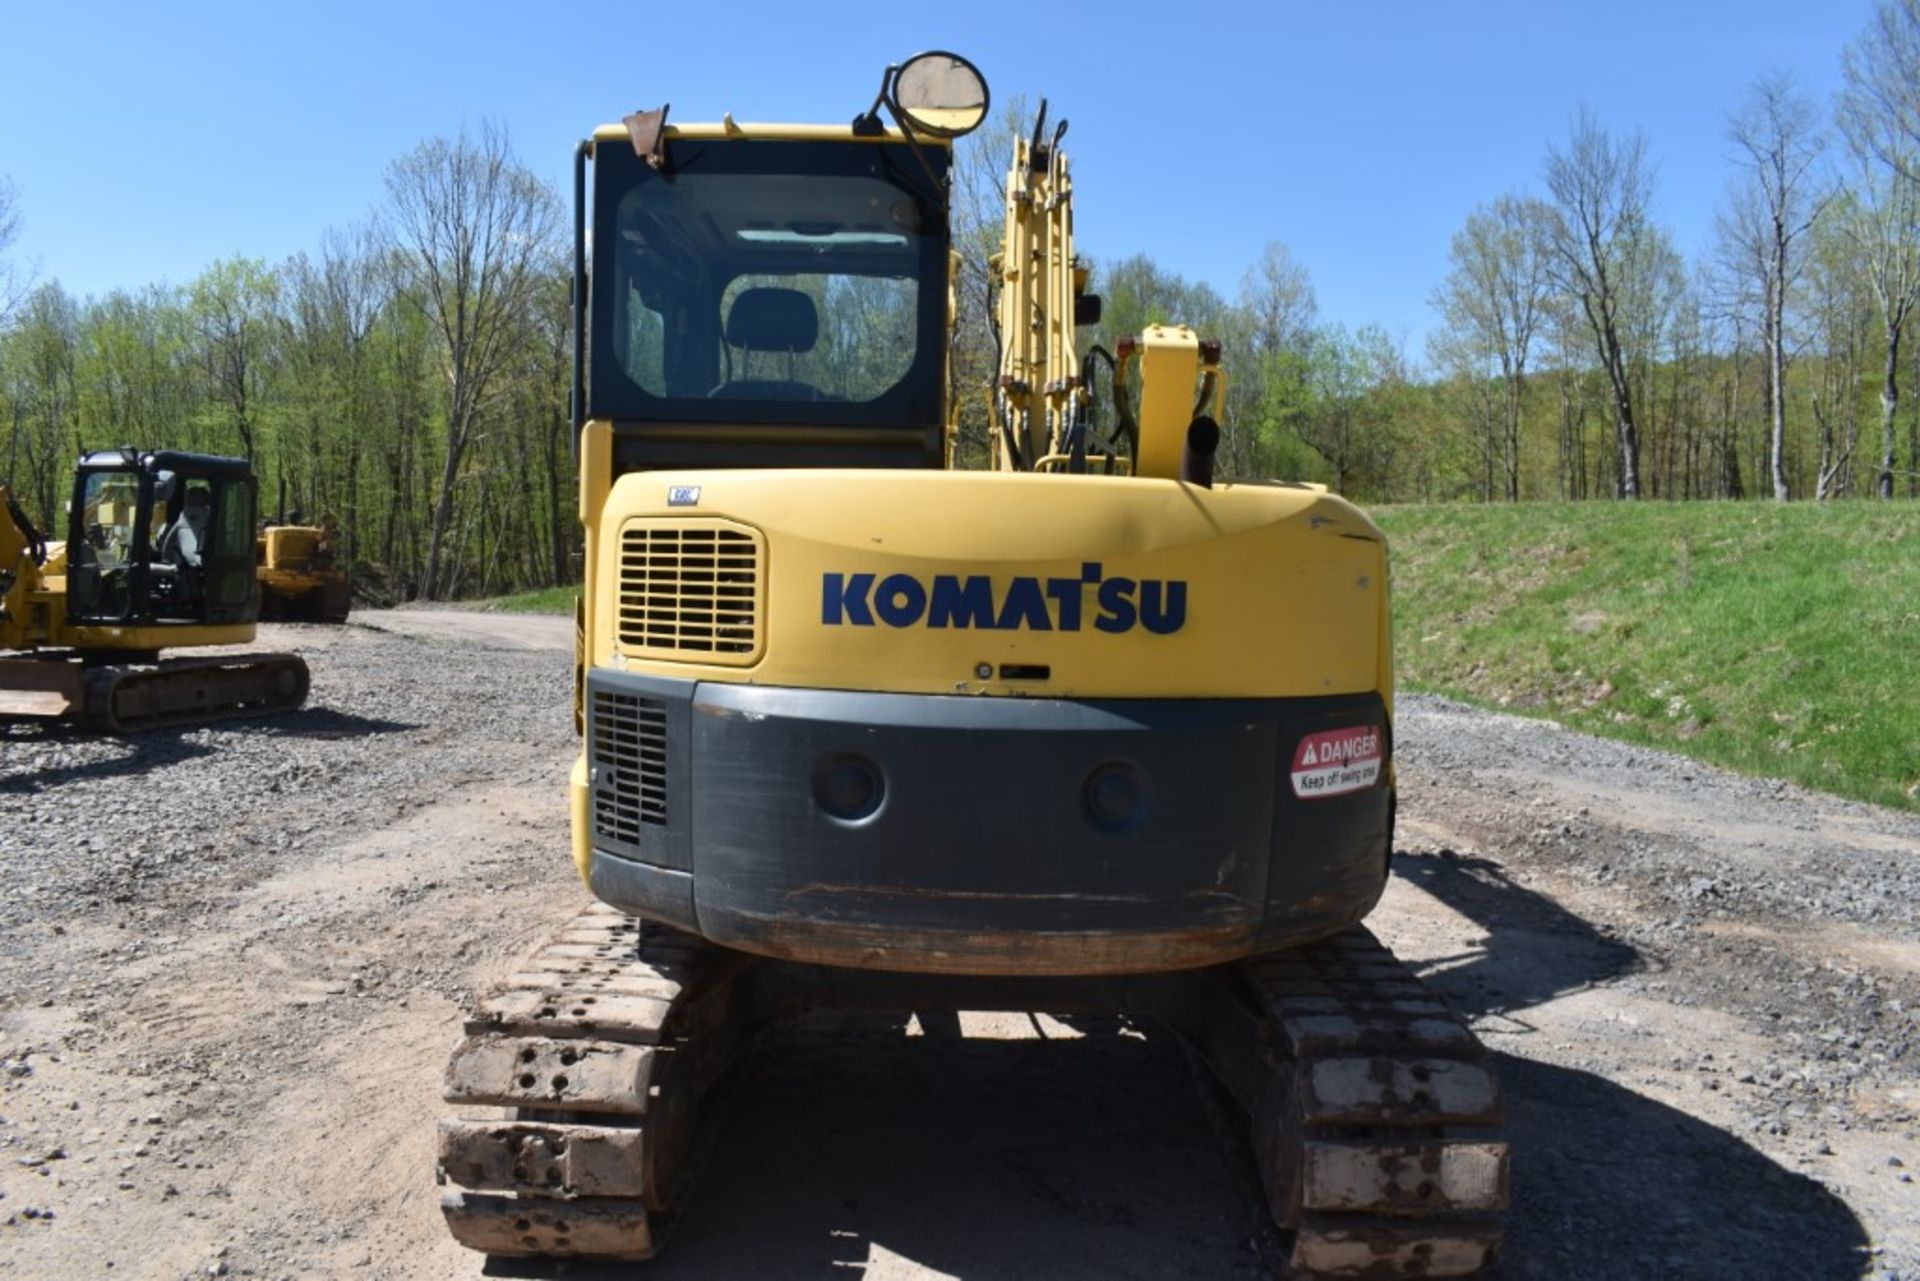 Komatsu PC88MR-8 Excavator 8704 Hours, Runs and Operates, WB 24" Bucket, Quick Coupler, Auxiliary - Image 17 of 49